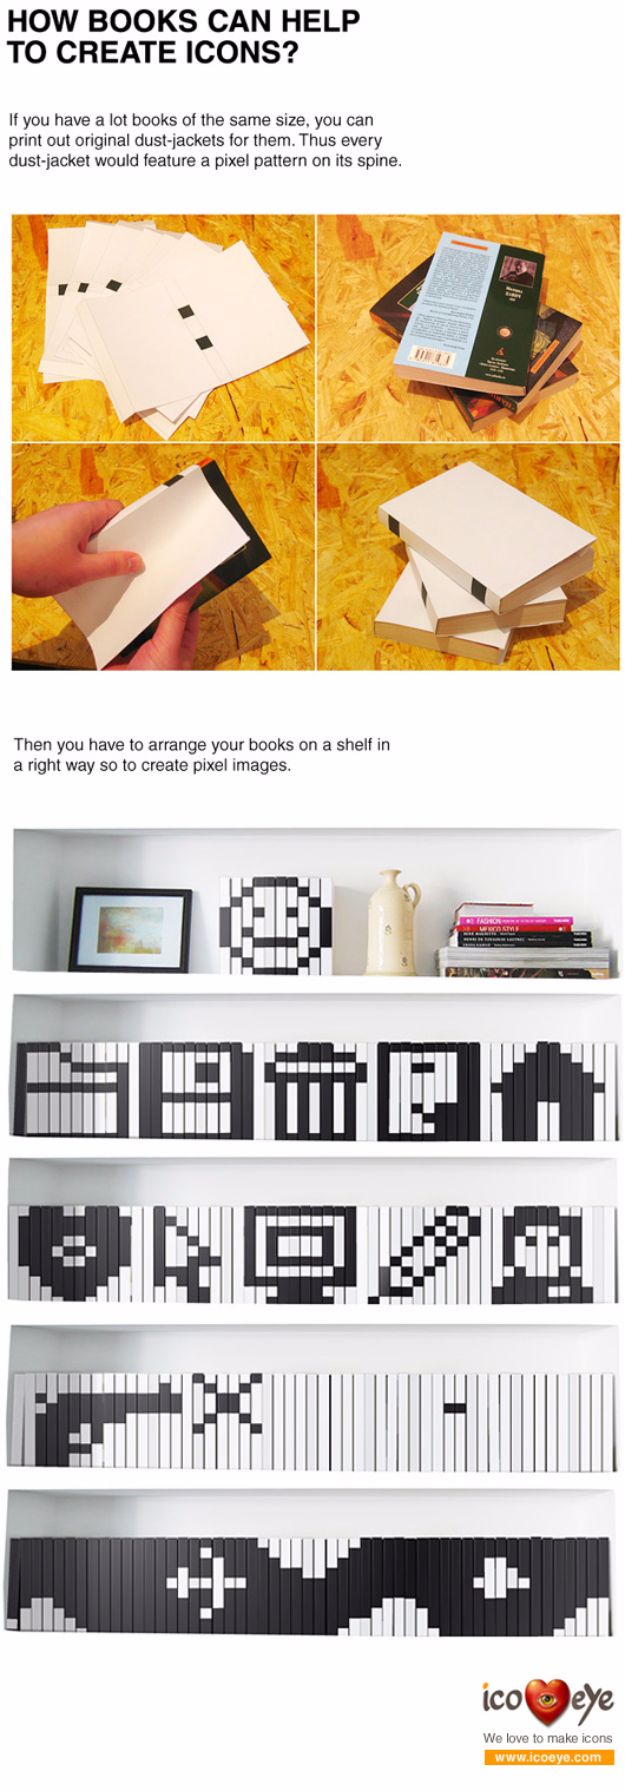 DIY Projects for Readers - Pixelated Bookshelf - Book Storage, Bookmarks, Cool Bookshelves, Creative Projects Made With Books and For Book Lovers - Reading Lights, Bedside Table Ideas - Easy Crafts and DIY Ideas by DIY JOY 